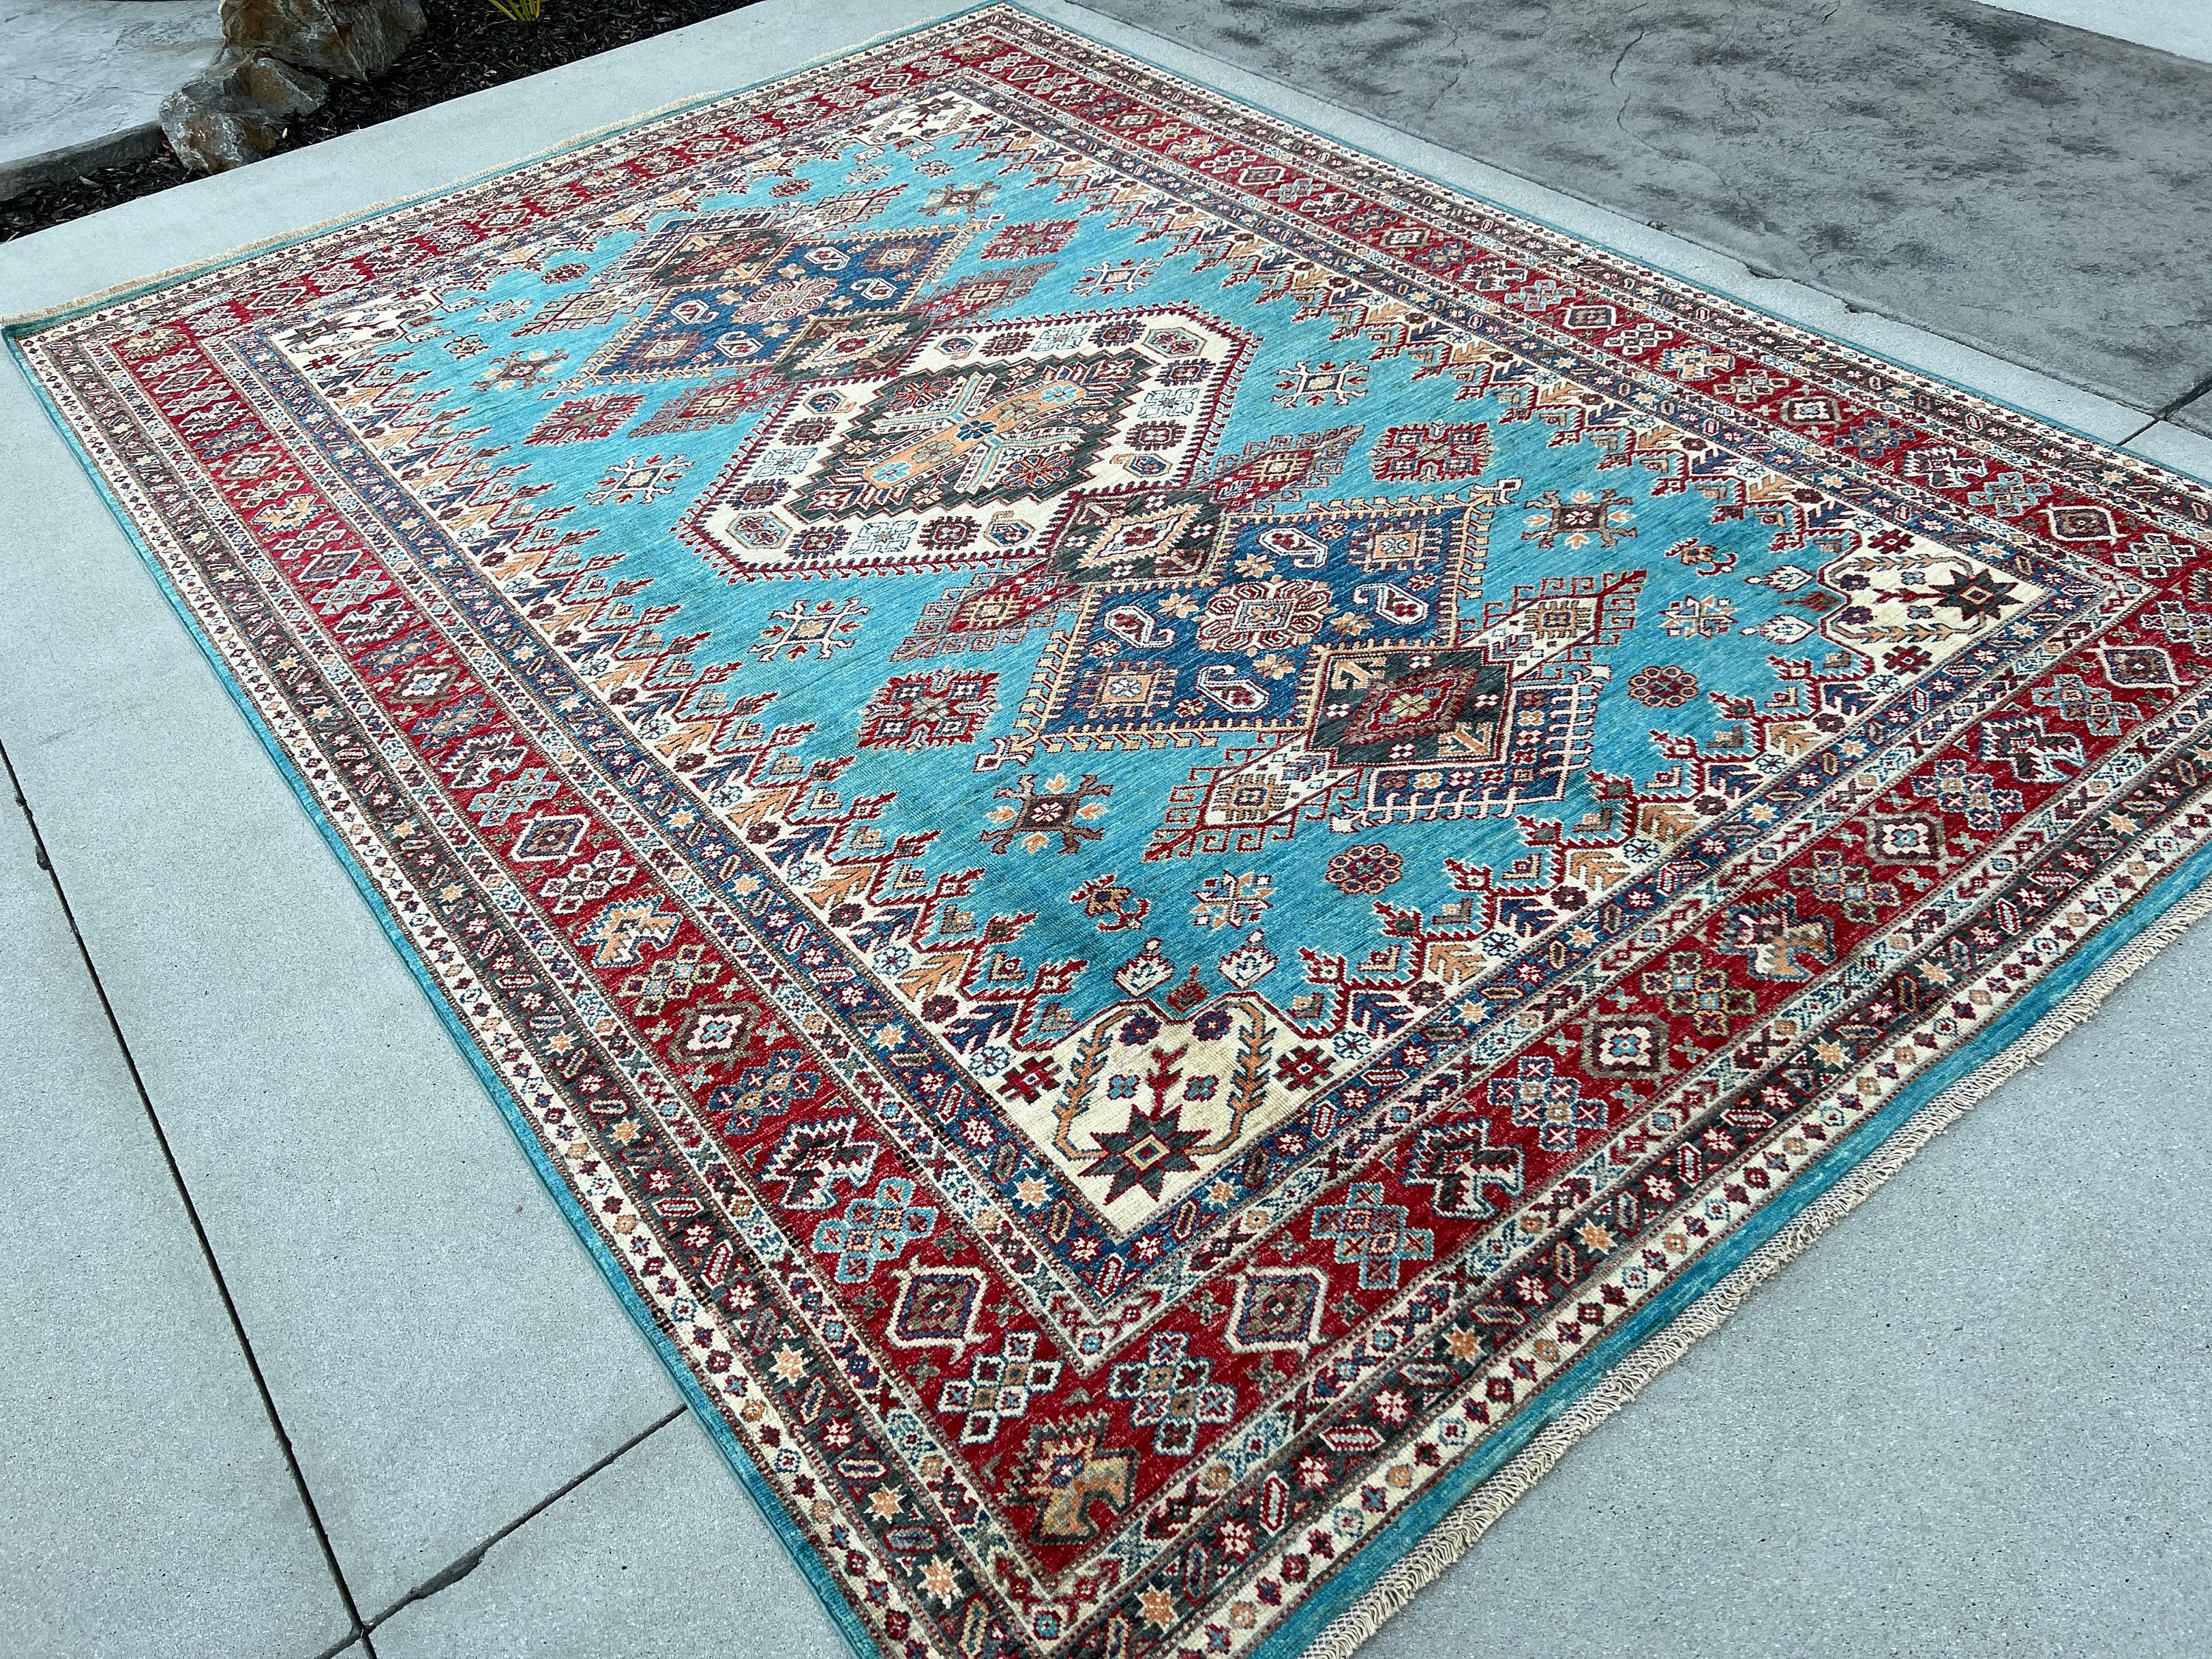 7x10 Hand-Knotted Afghan Rug Premium Hand-Spun Afghan Wool Fair Trade In New Condition For Sale In San Marcos, CA